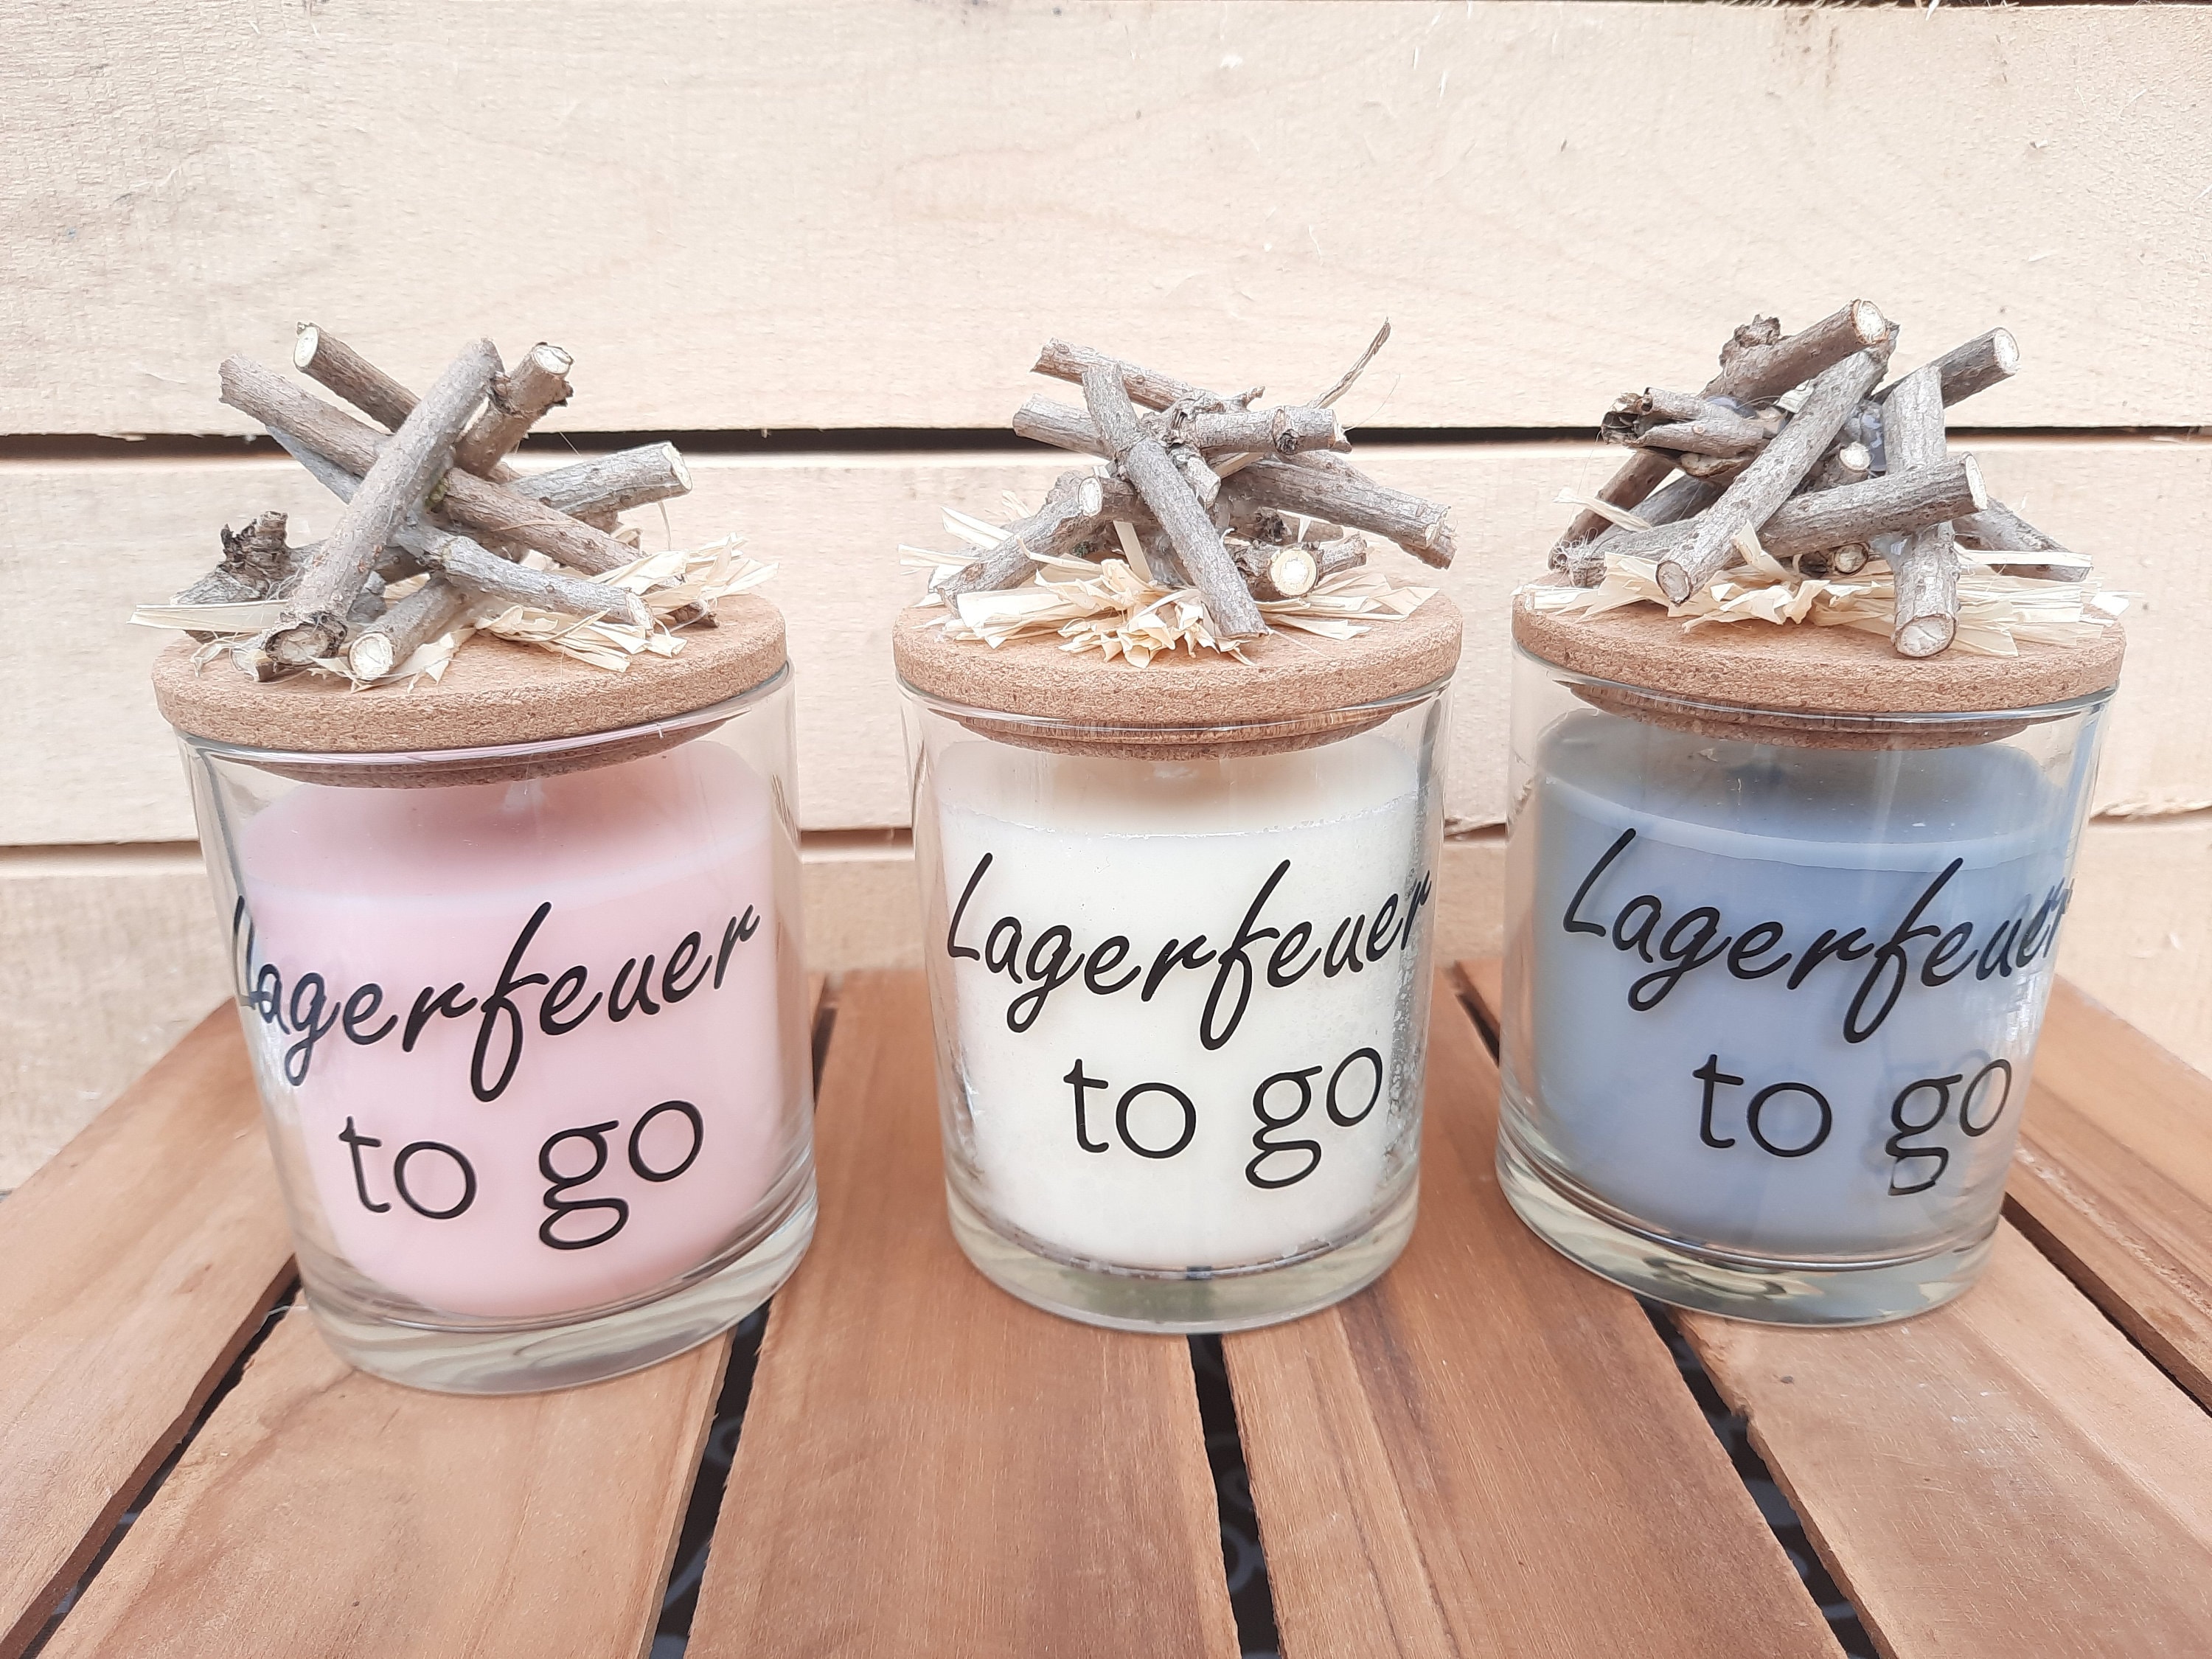 12-24 Candles in a Glass Jar With Cork Lid, Round Label thank You and Twine  Wedding Guest Gift Wedding Accessory 